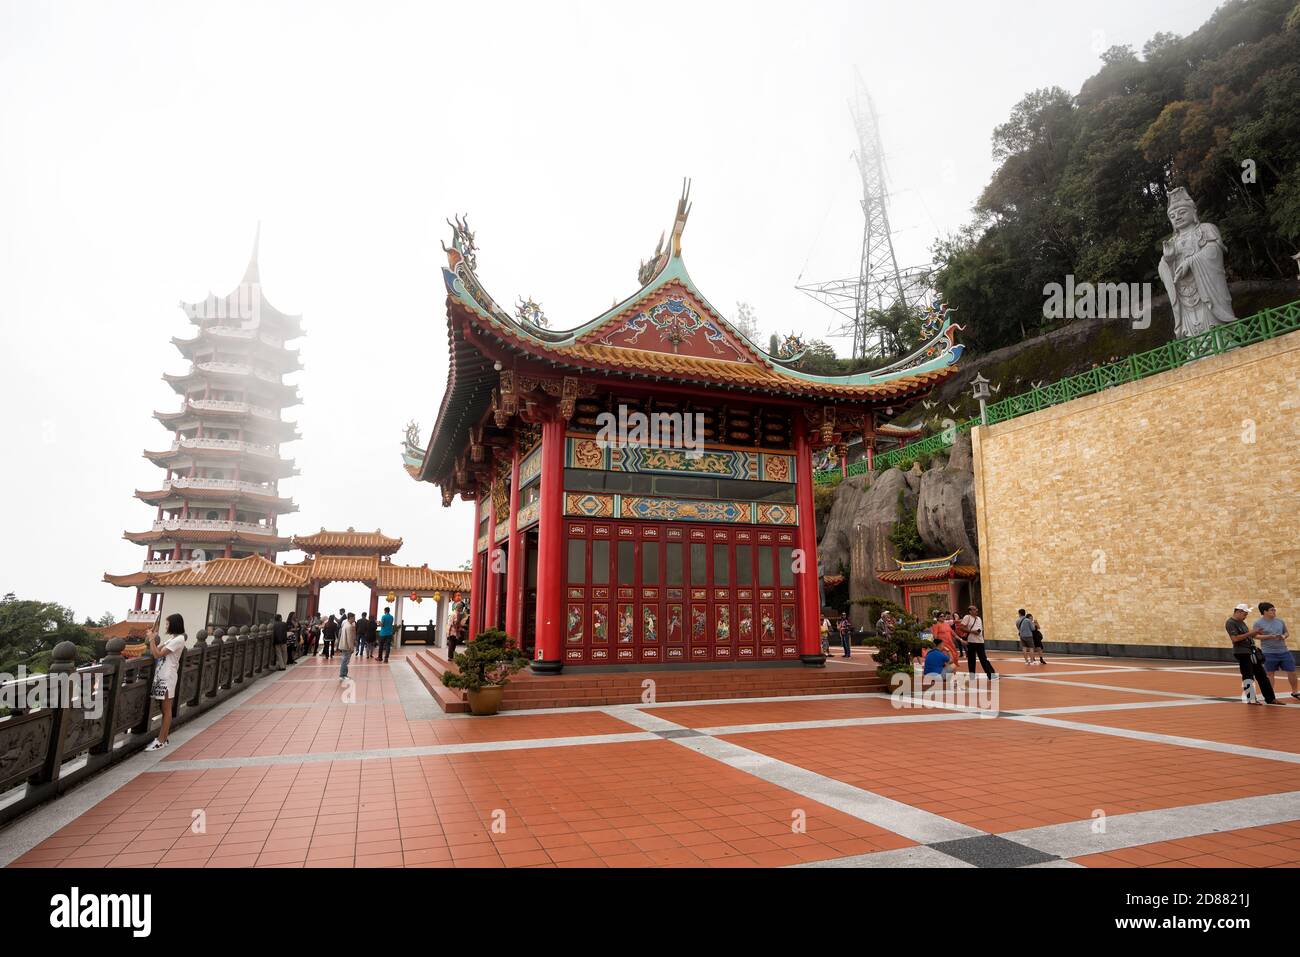 Genting Highland, Malaysia - Nov 20, 2018: Unidentified tourists visiting the scenic site of foggy Chin Swee Temple, Genting Highland, Malaysia - The Stock Photo